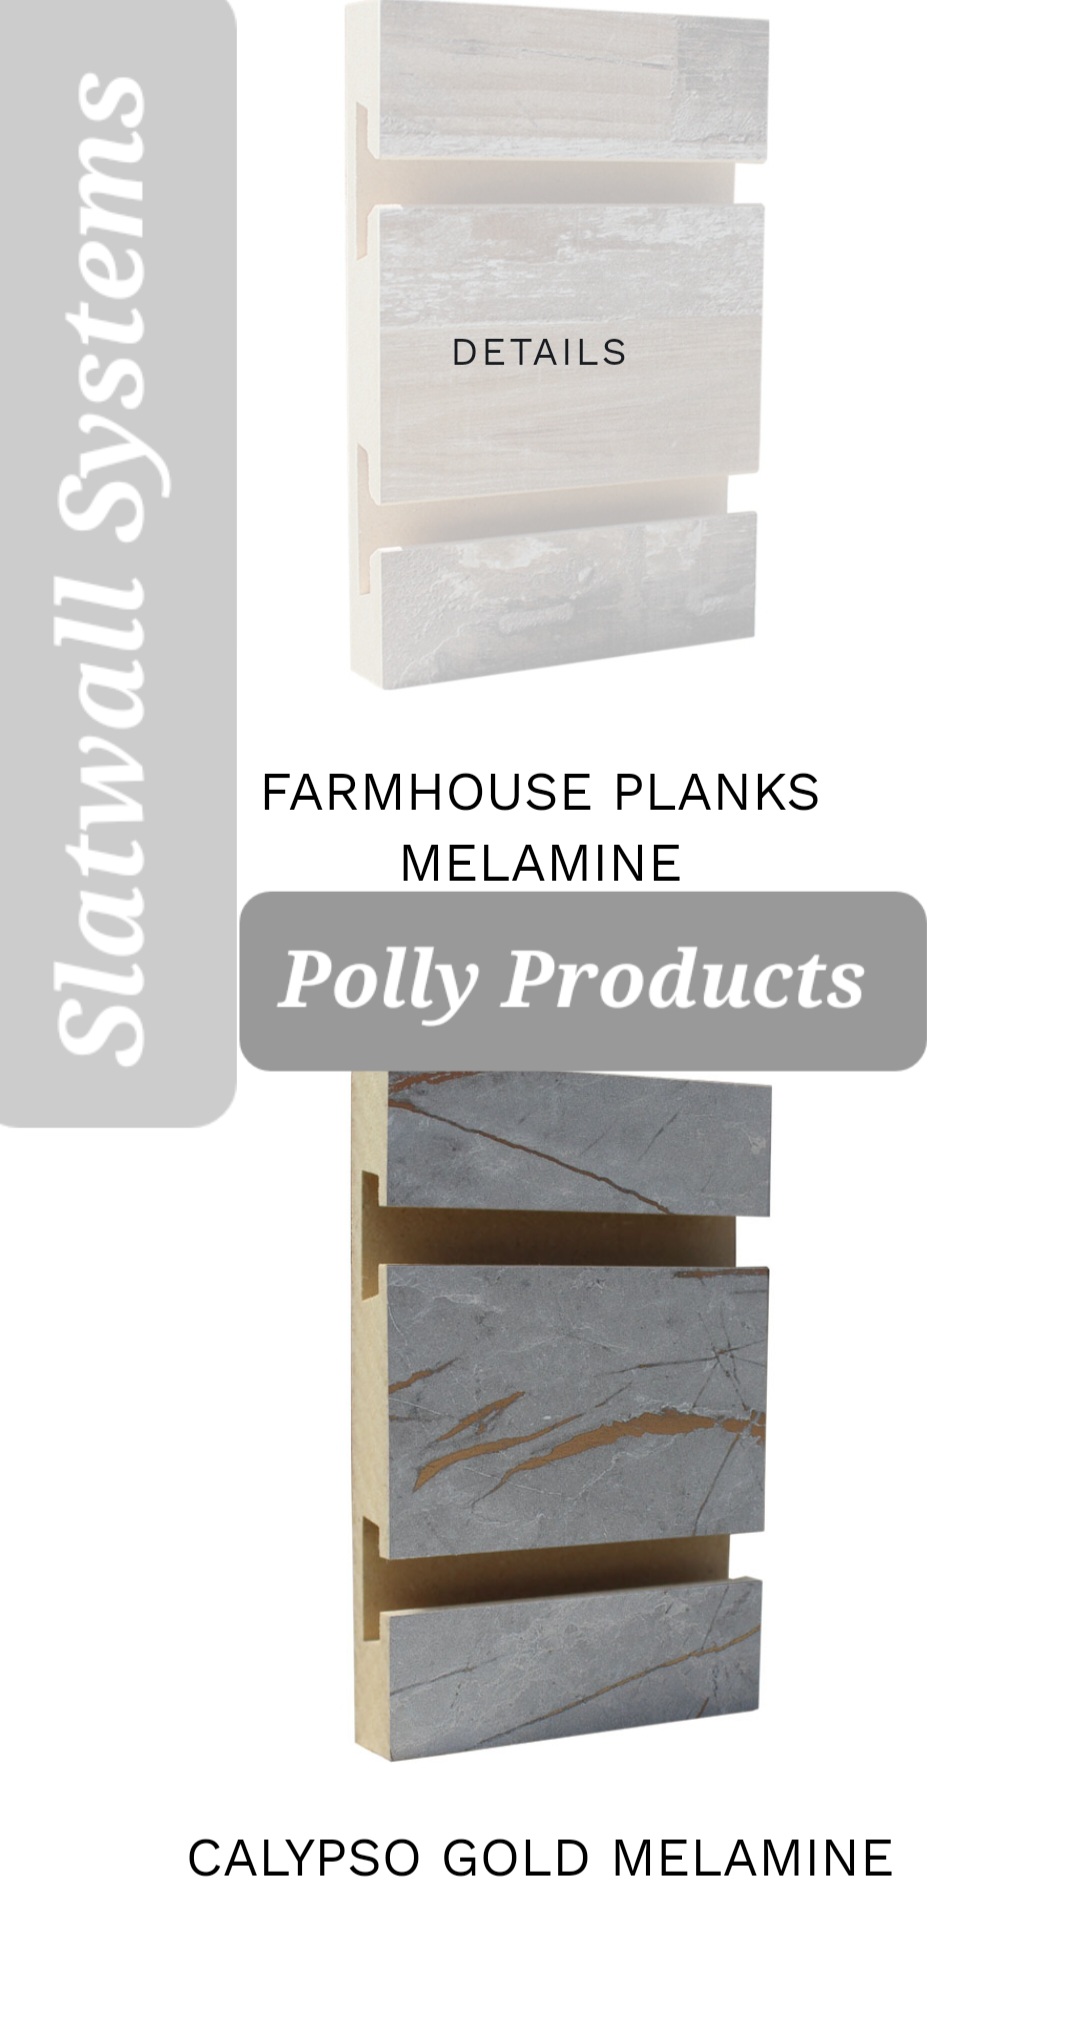 POLLY PRODUCTS Slat Wall Systems. Made in the USA 🇺🇸 Quality. GRAY MELLAMINE.